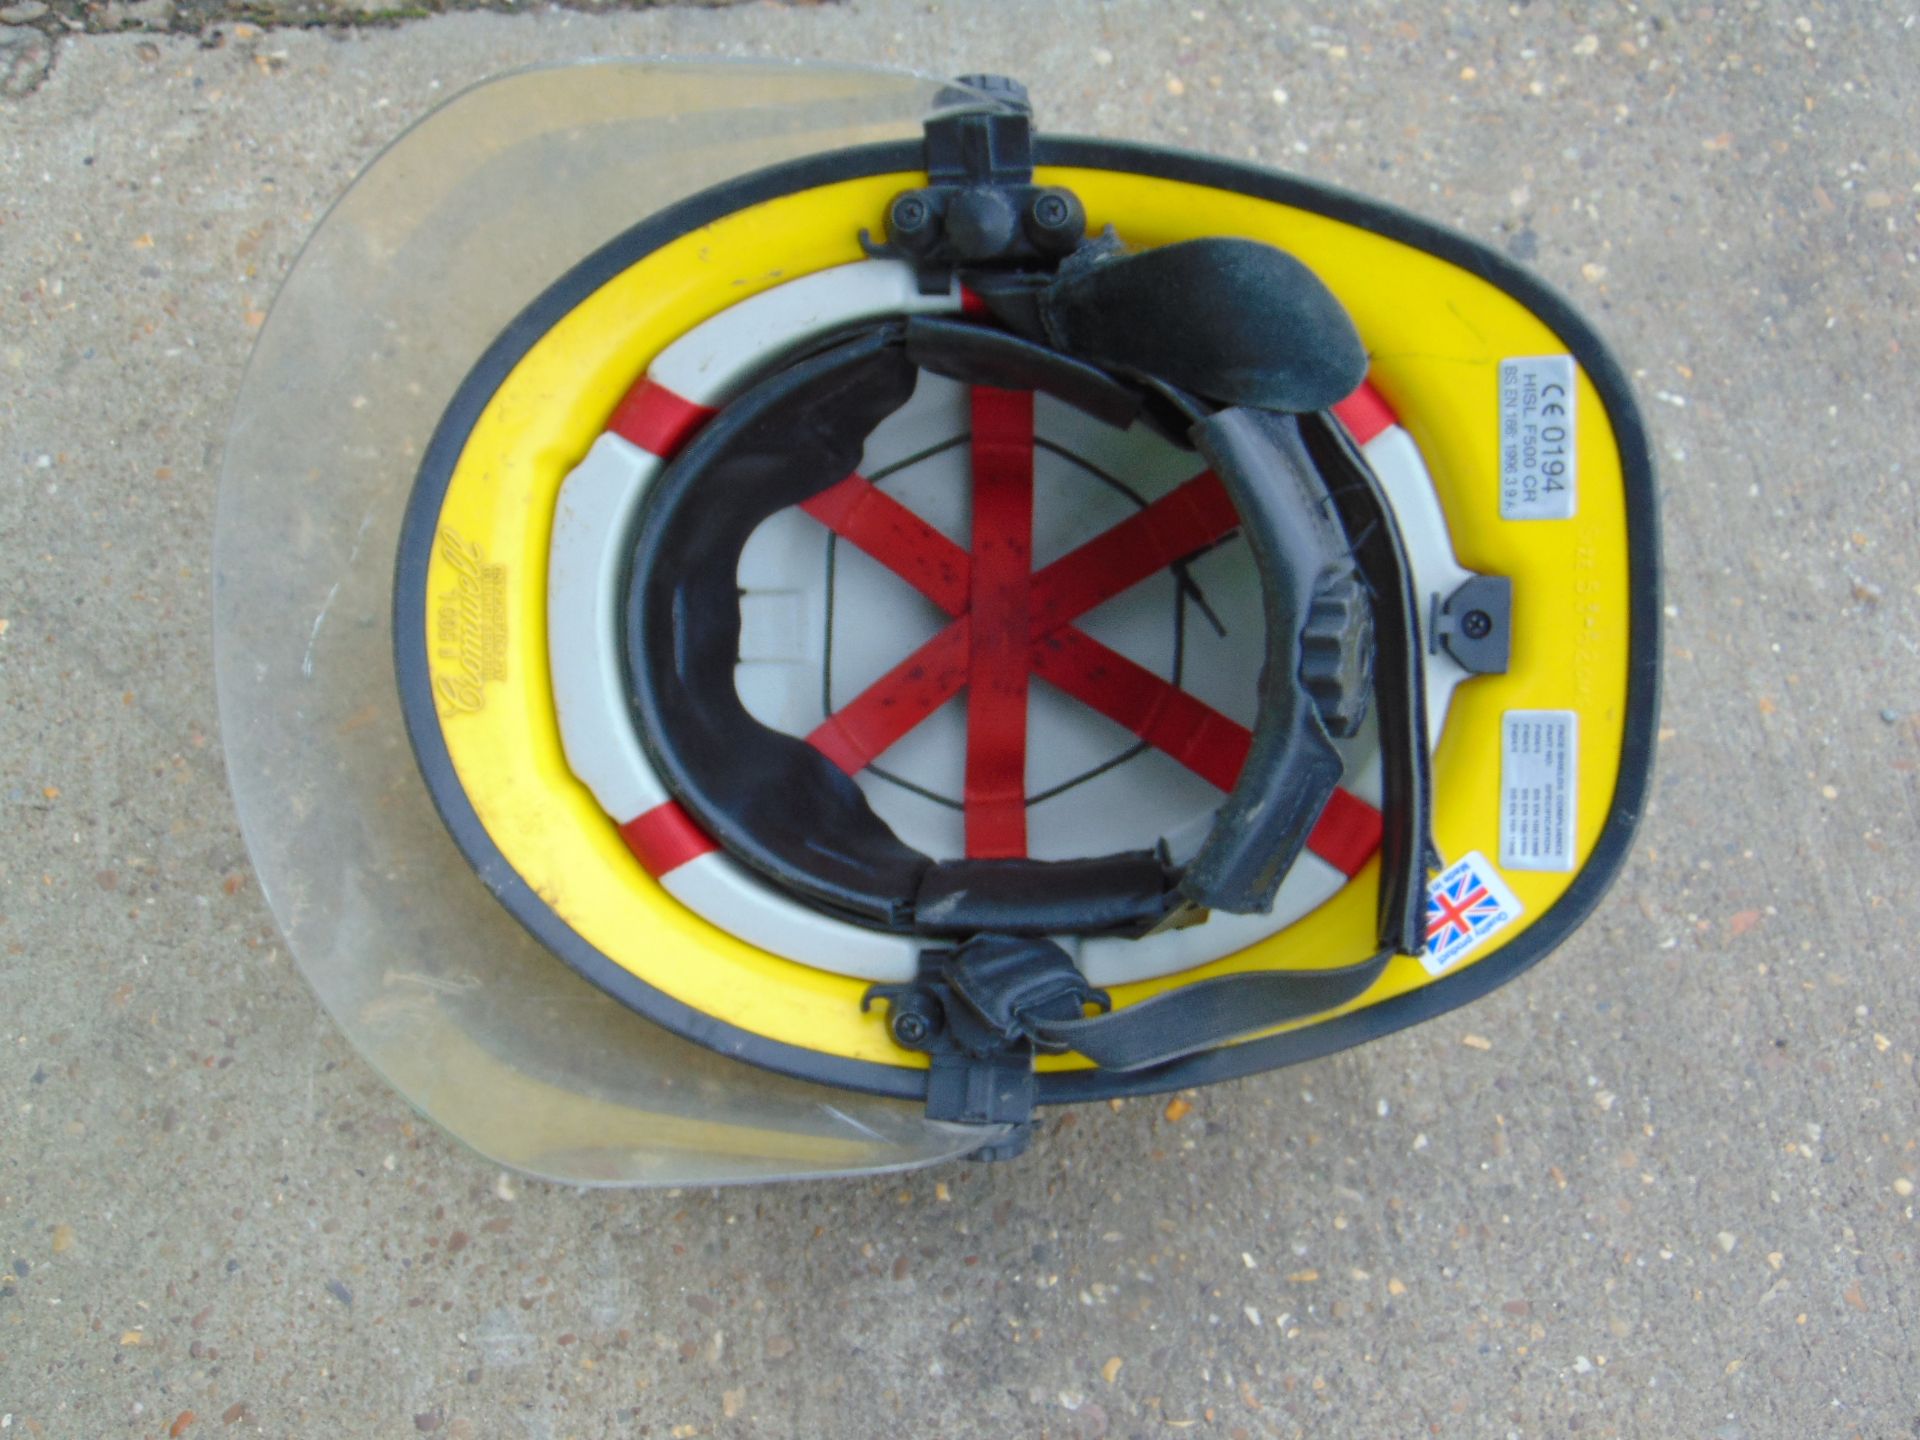 22 x FIREFIGHTER HELMETS VARIOUS TYPES - Image 2 of 4